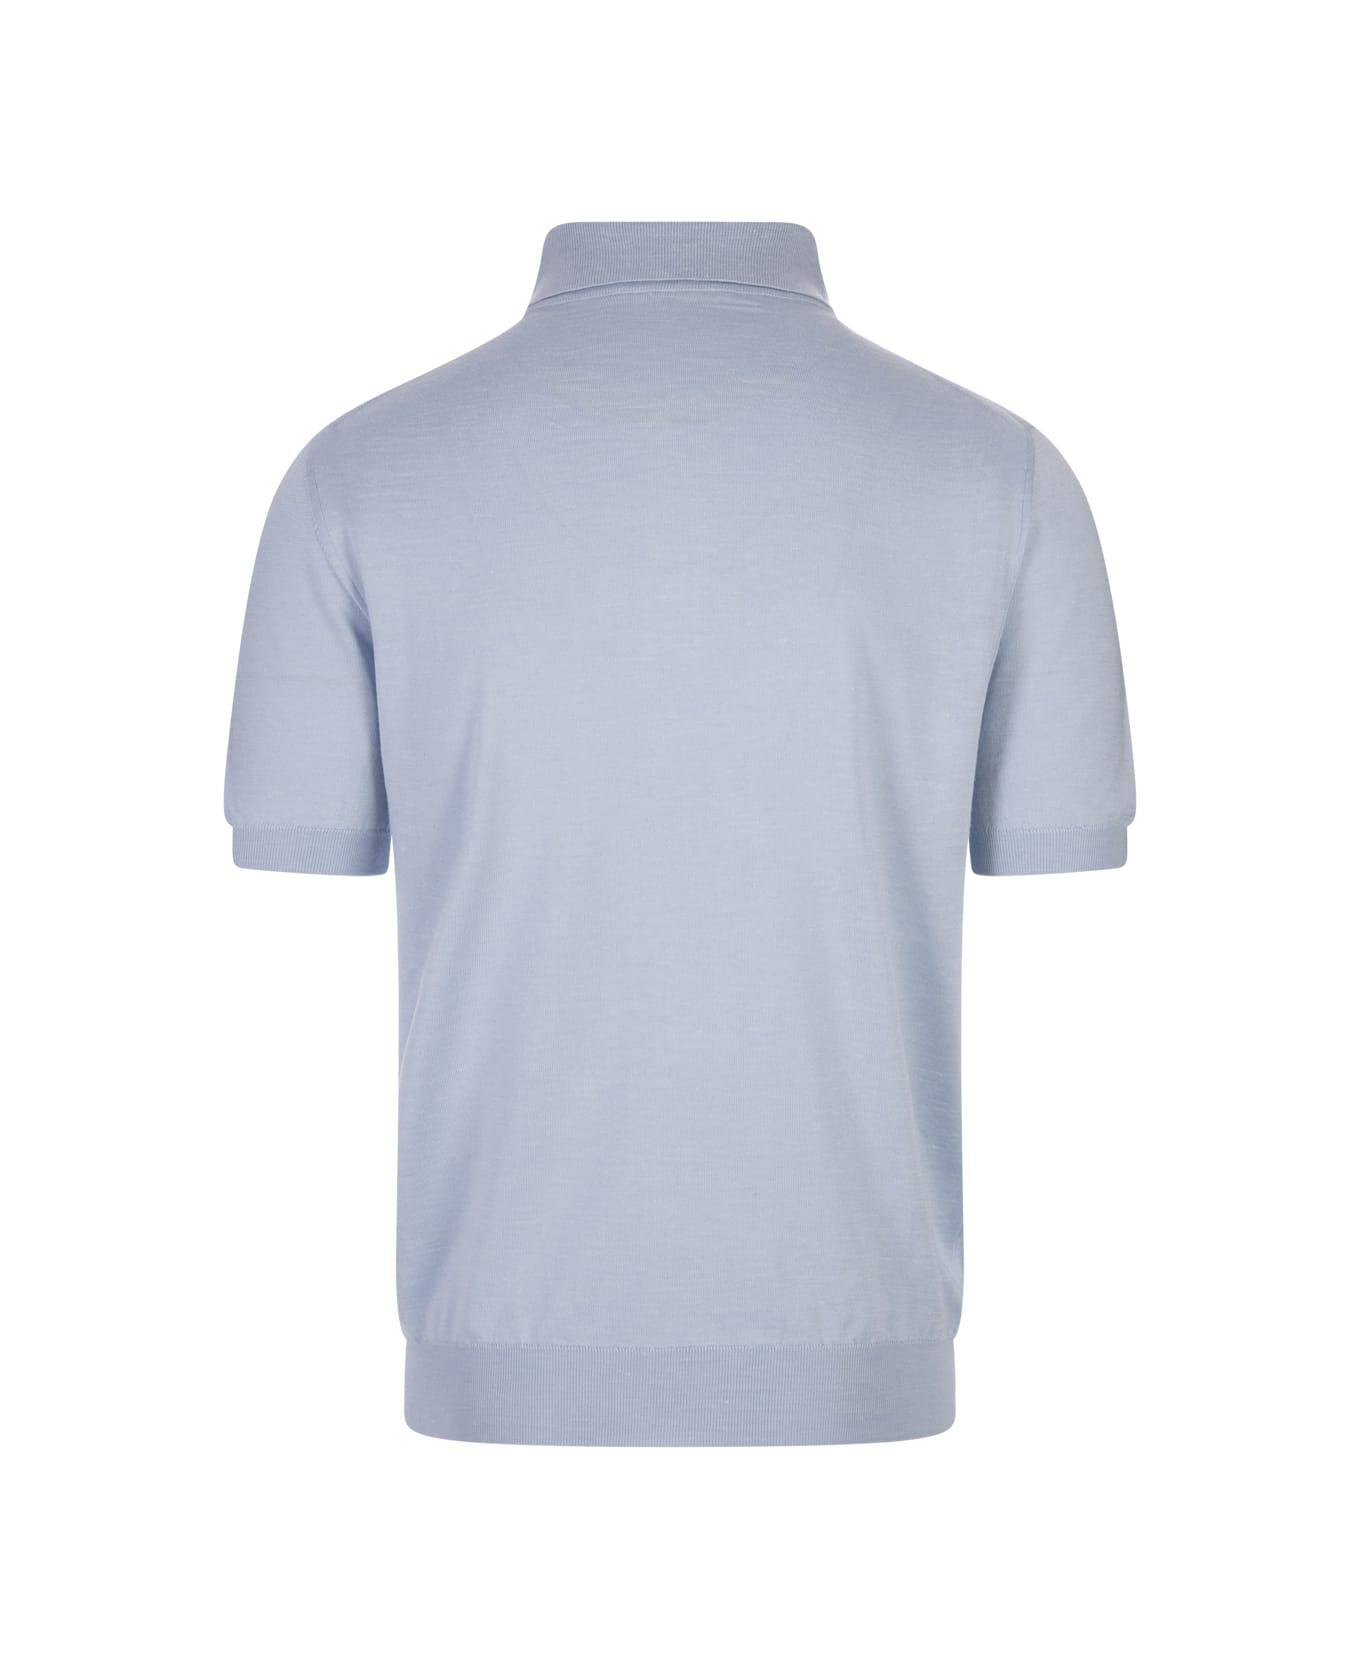 Kiton Sky Blue Knitted Short-sleeved Polo Shirt - Blue ポロシャツ